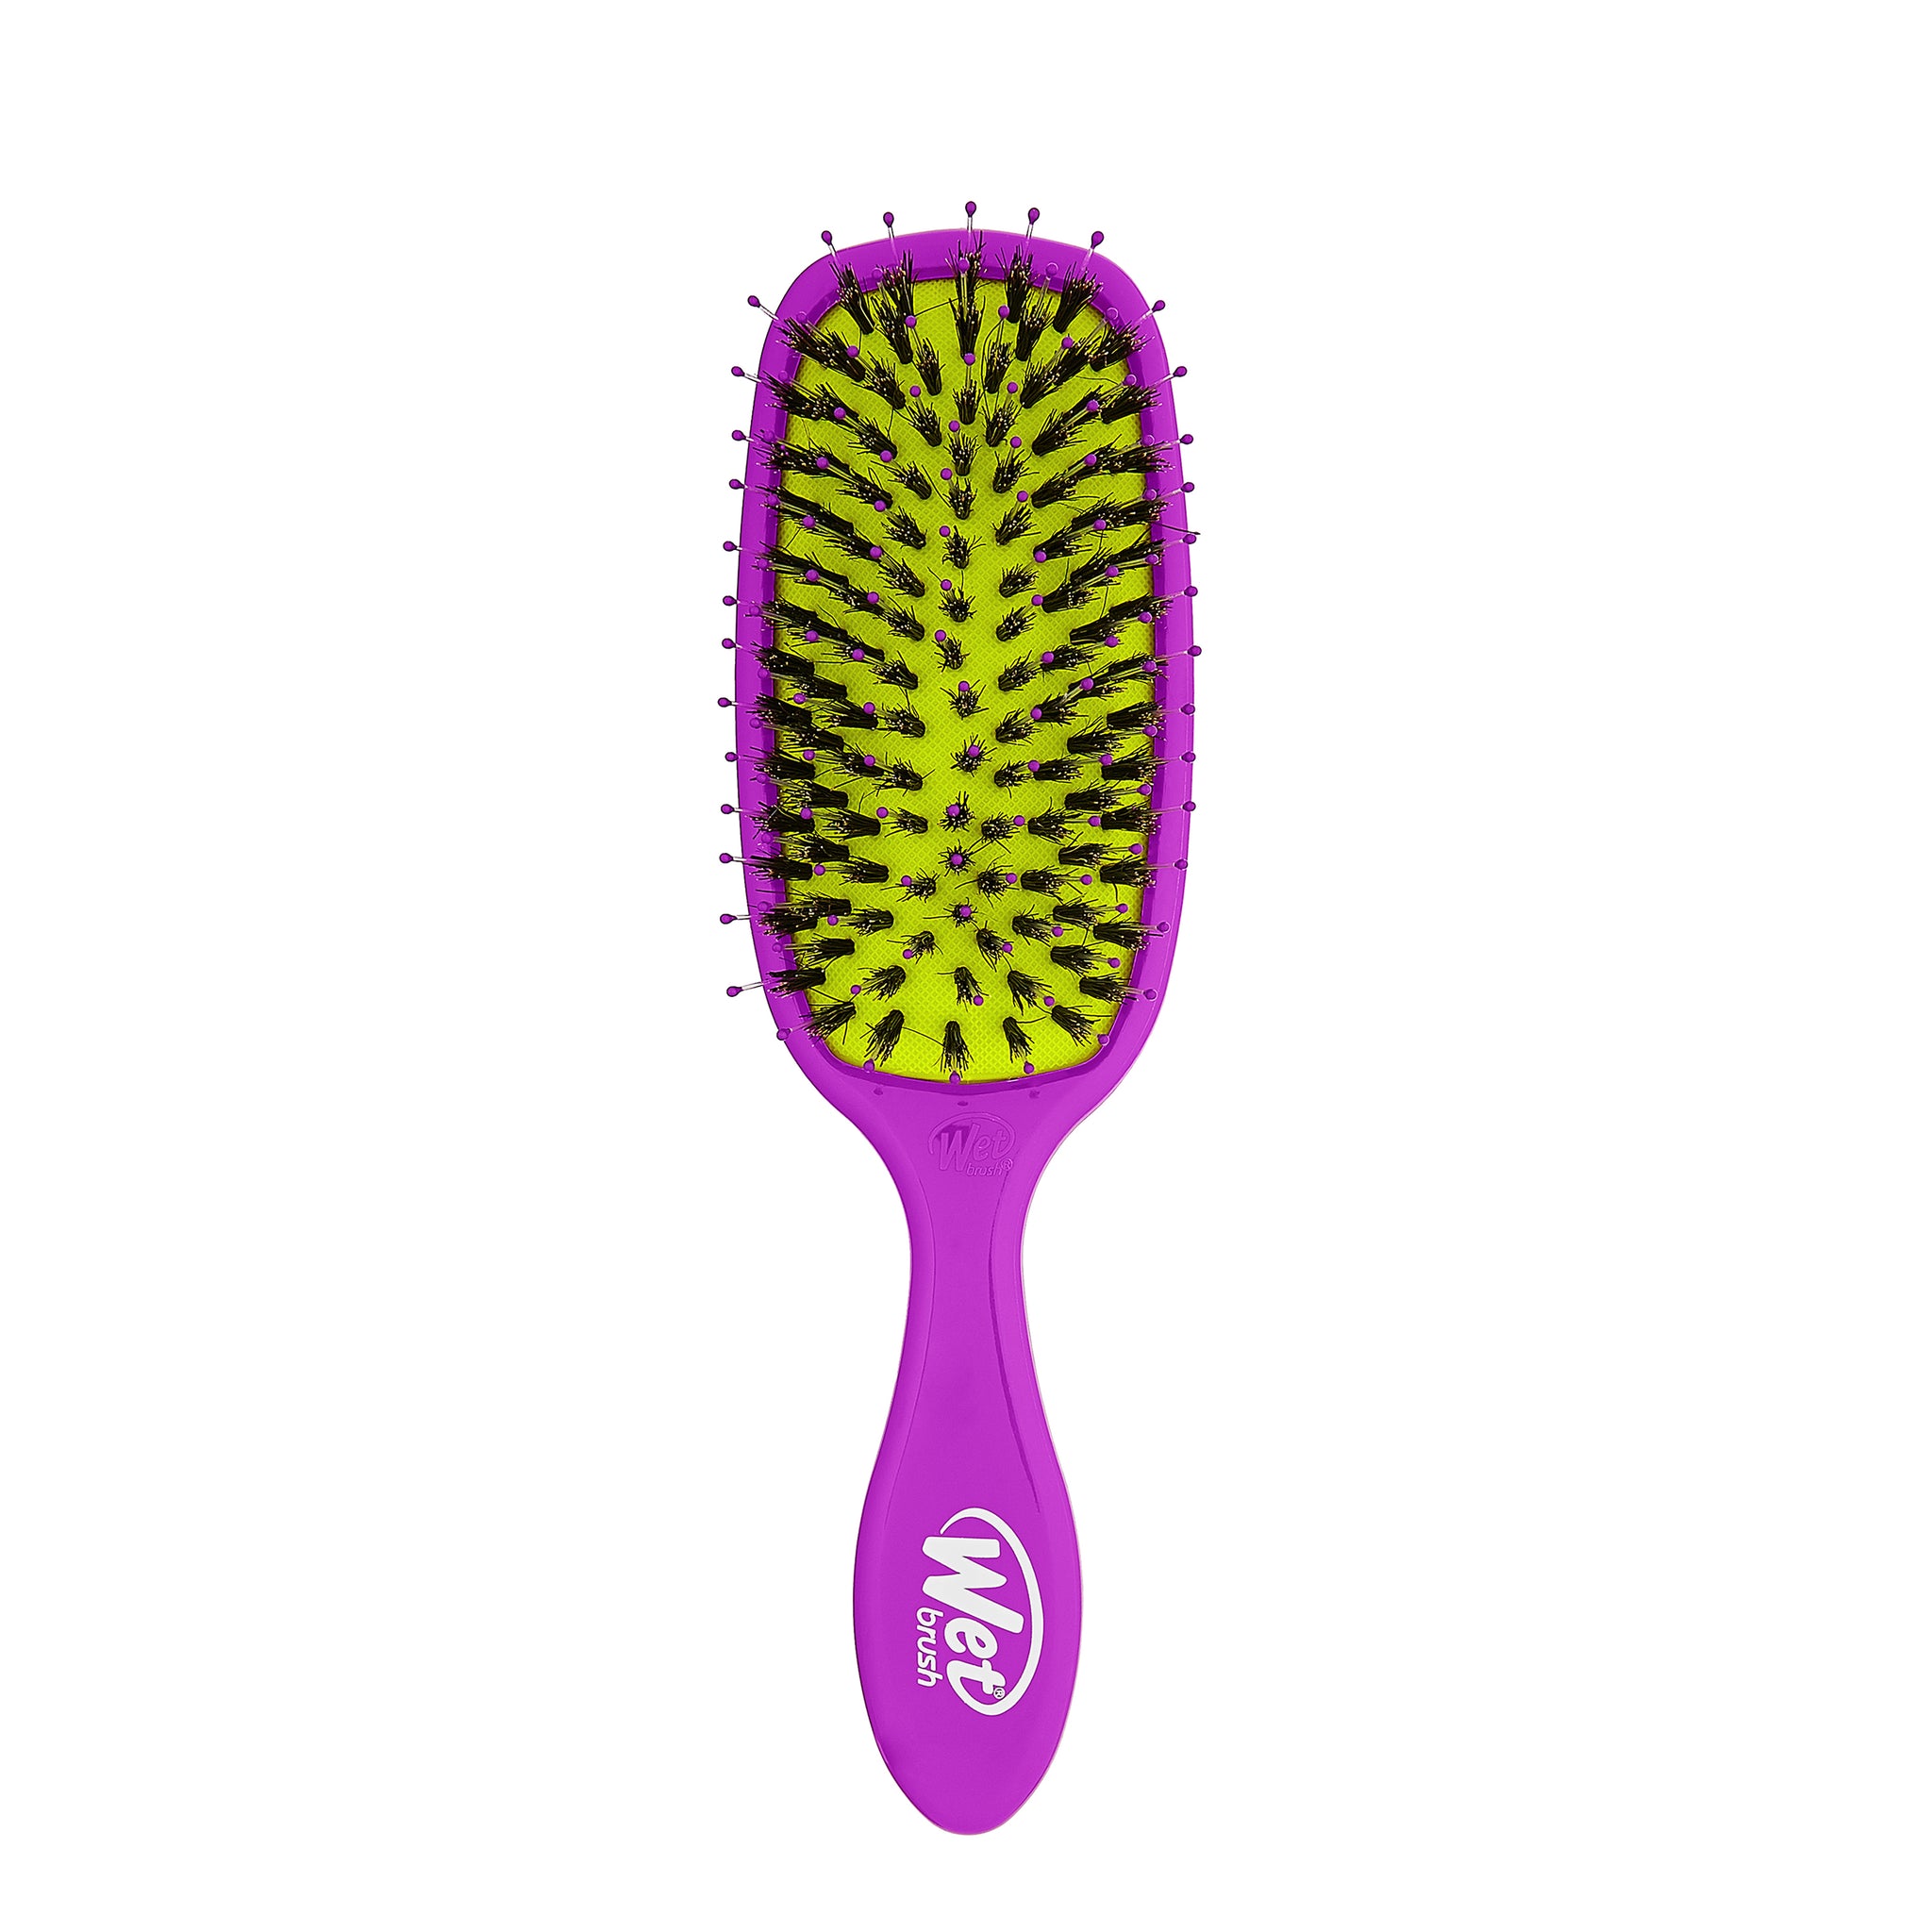 3pcs Hair Brush Cleaners Hair Brush Cleaning Tool Comb Cleaning Tools